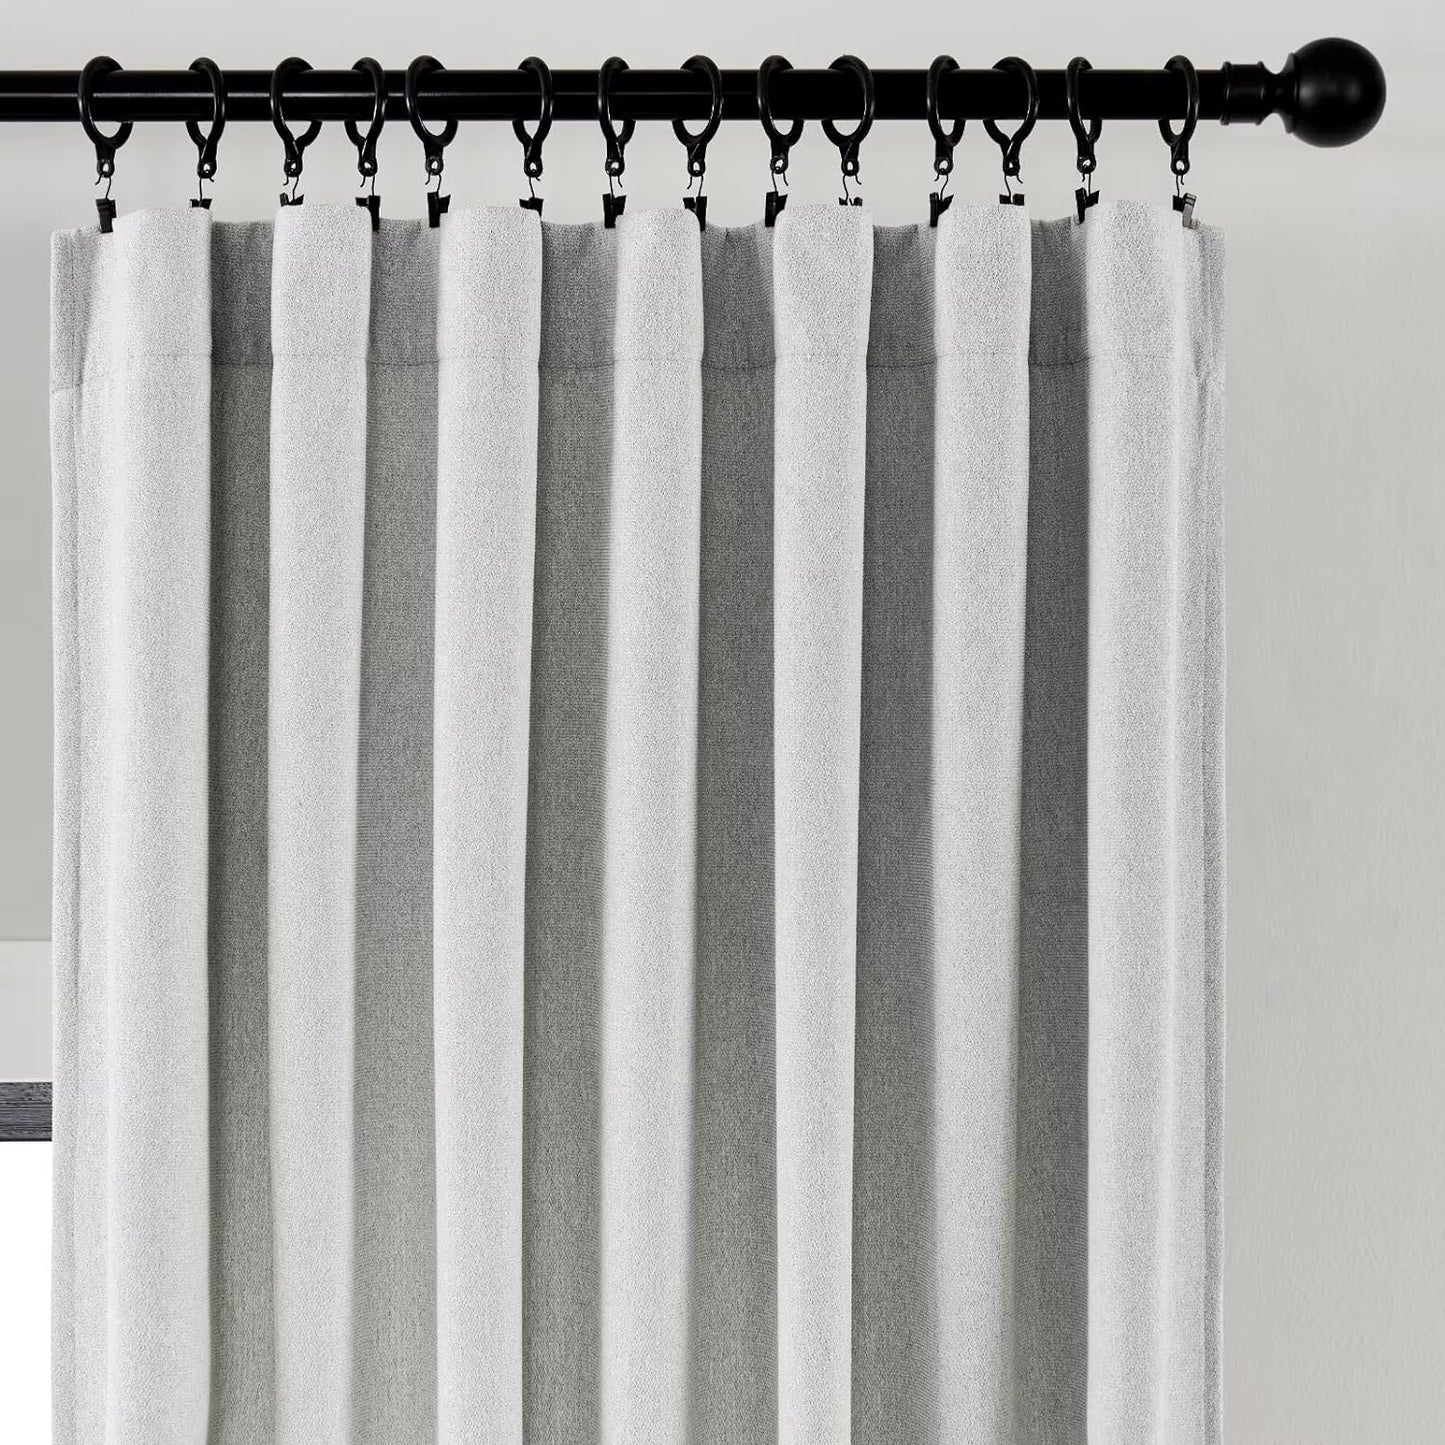 Joydeco Light Filtering Curtains 96 Inches Long for Bedroom Living Room, Faux Linen Curtains 96 Inch Length 2 Panels Set,Pinch Pleat Curtains for Bedroom Living Room(52X96 Inch, Greyish White)  Joydeco   